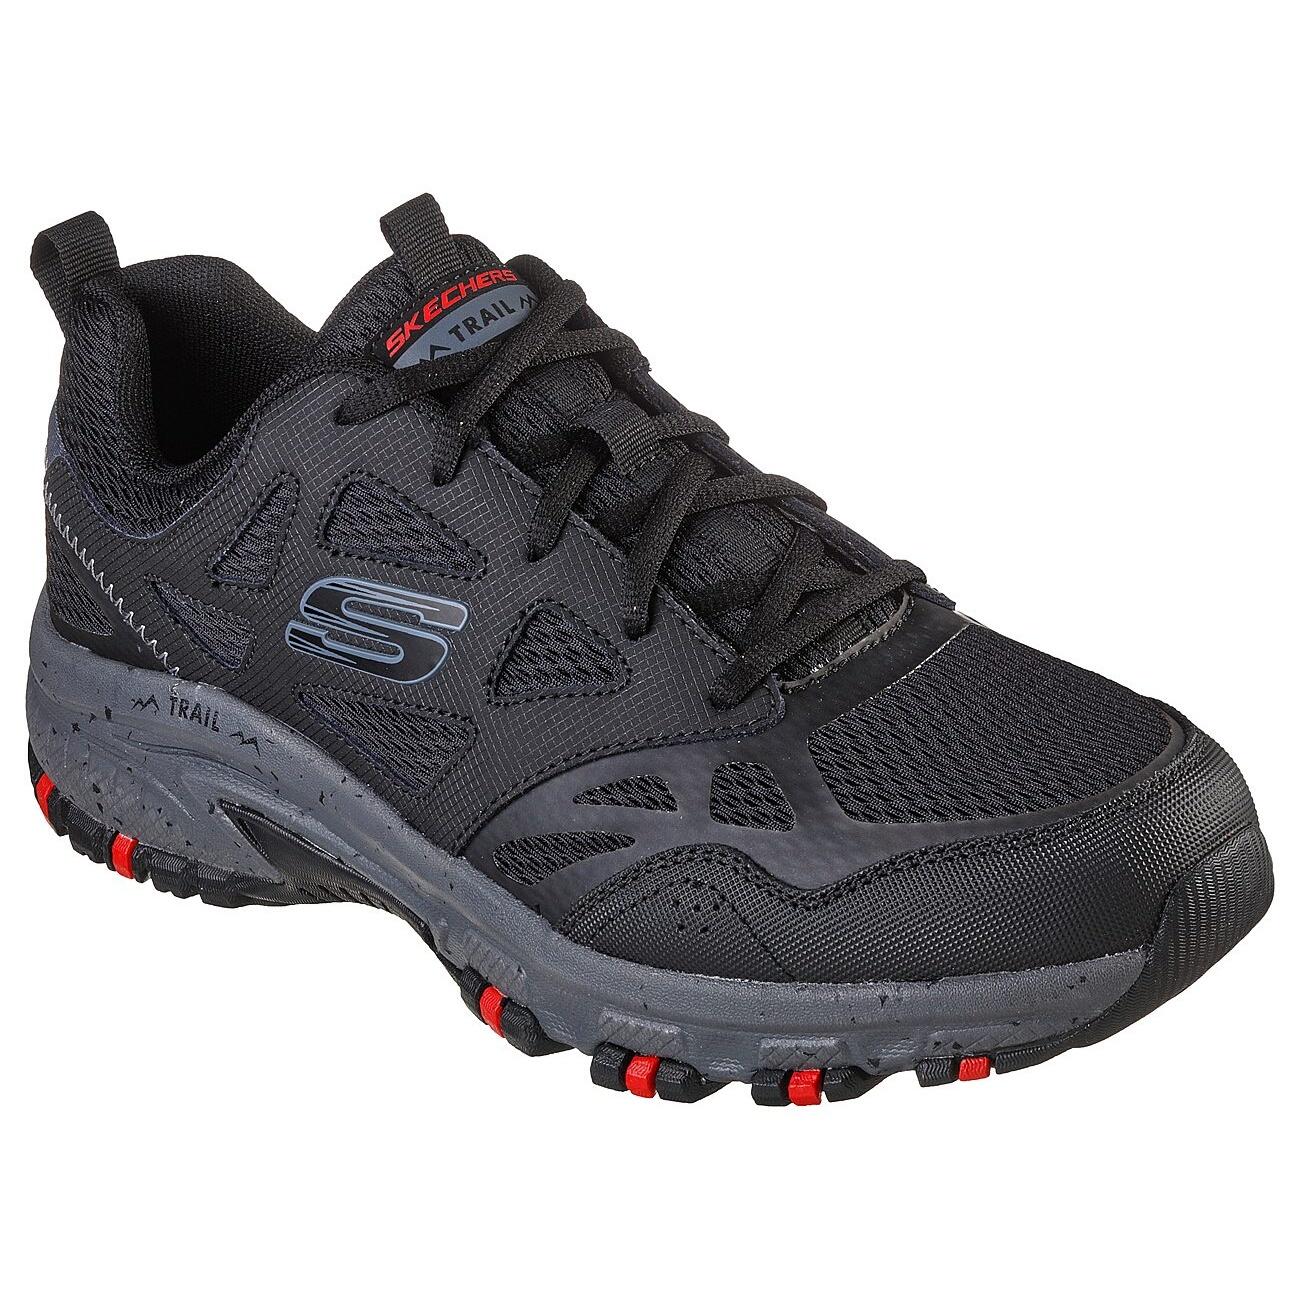 SKECHERS Mens Hillcrest Leather Trainers (Black/Charcoal)